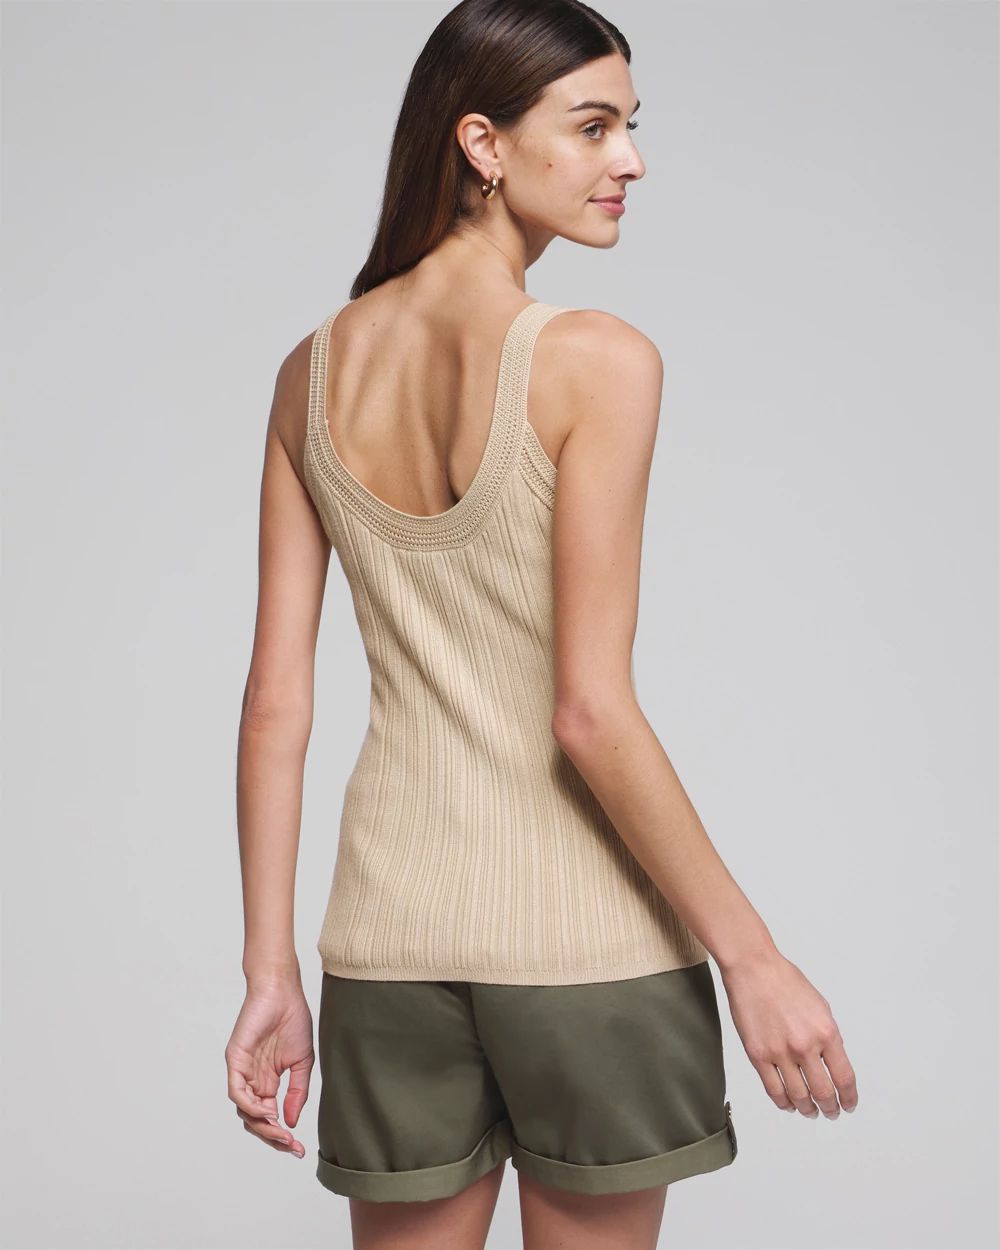 Outlet WHBM Stitch Accent Tank click to view larger image.